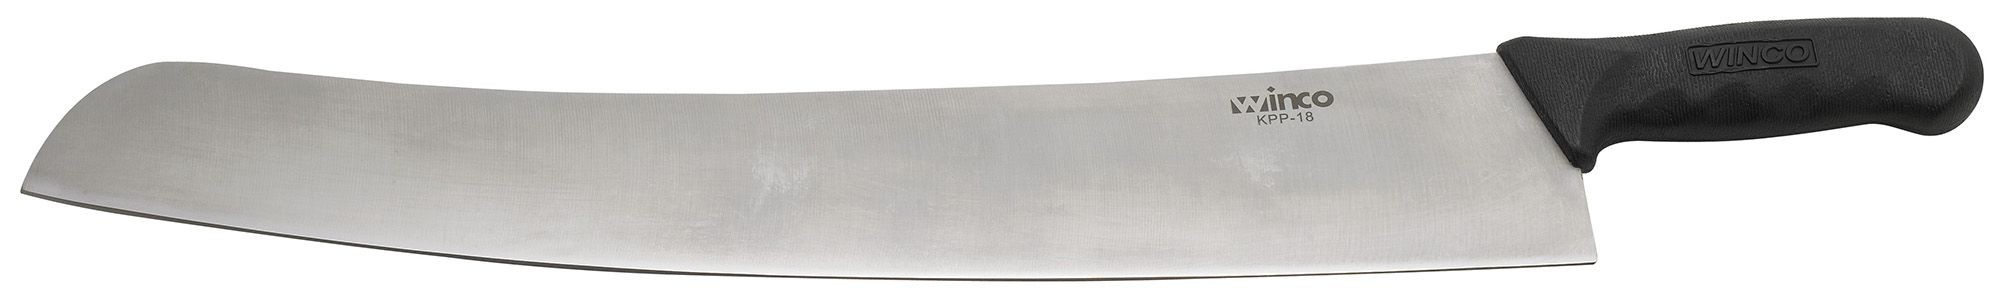 Winco KPP-18 Pizza Knife with Polypropylene Handle 18"